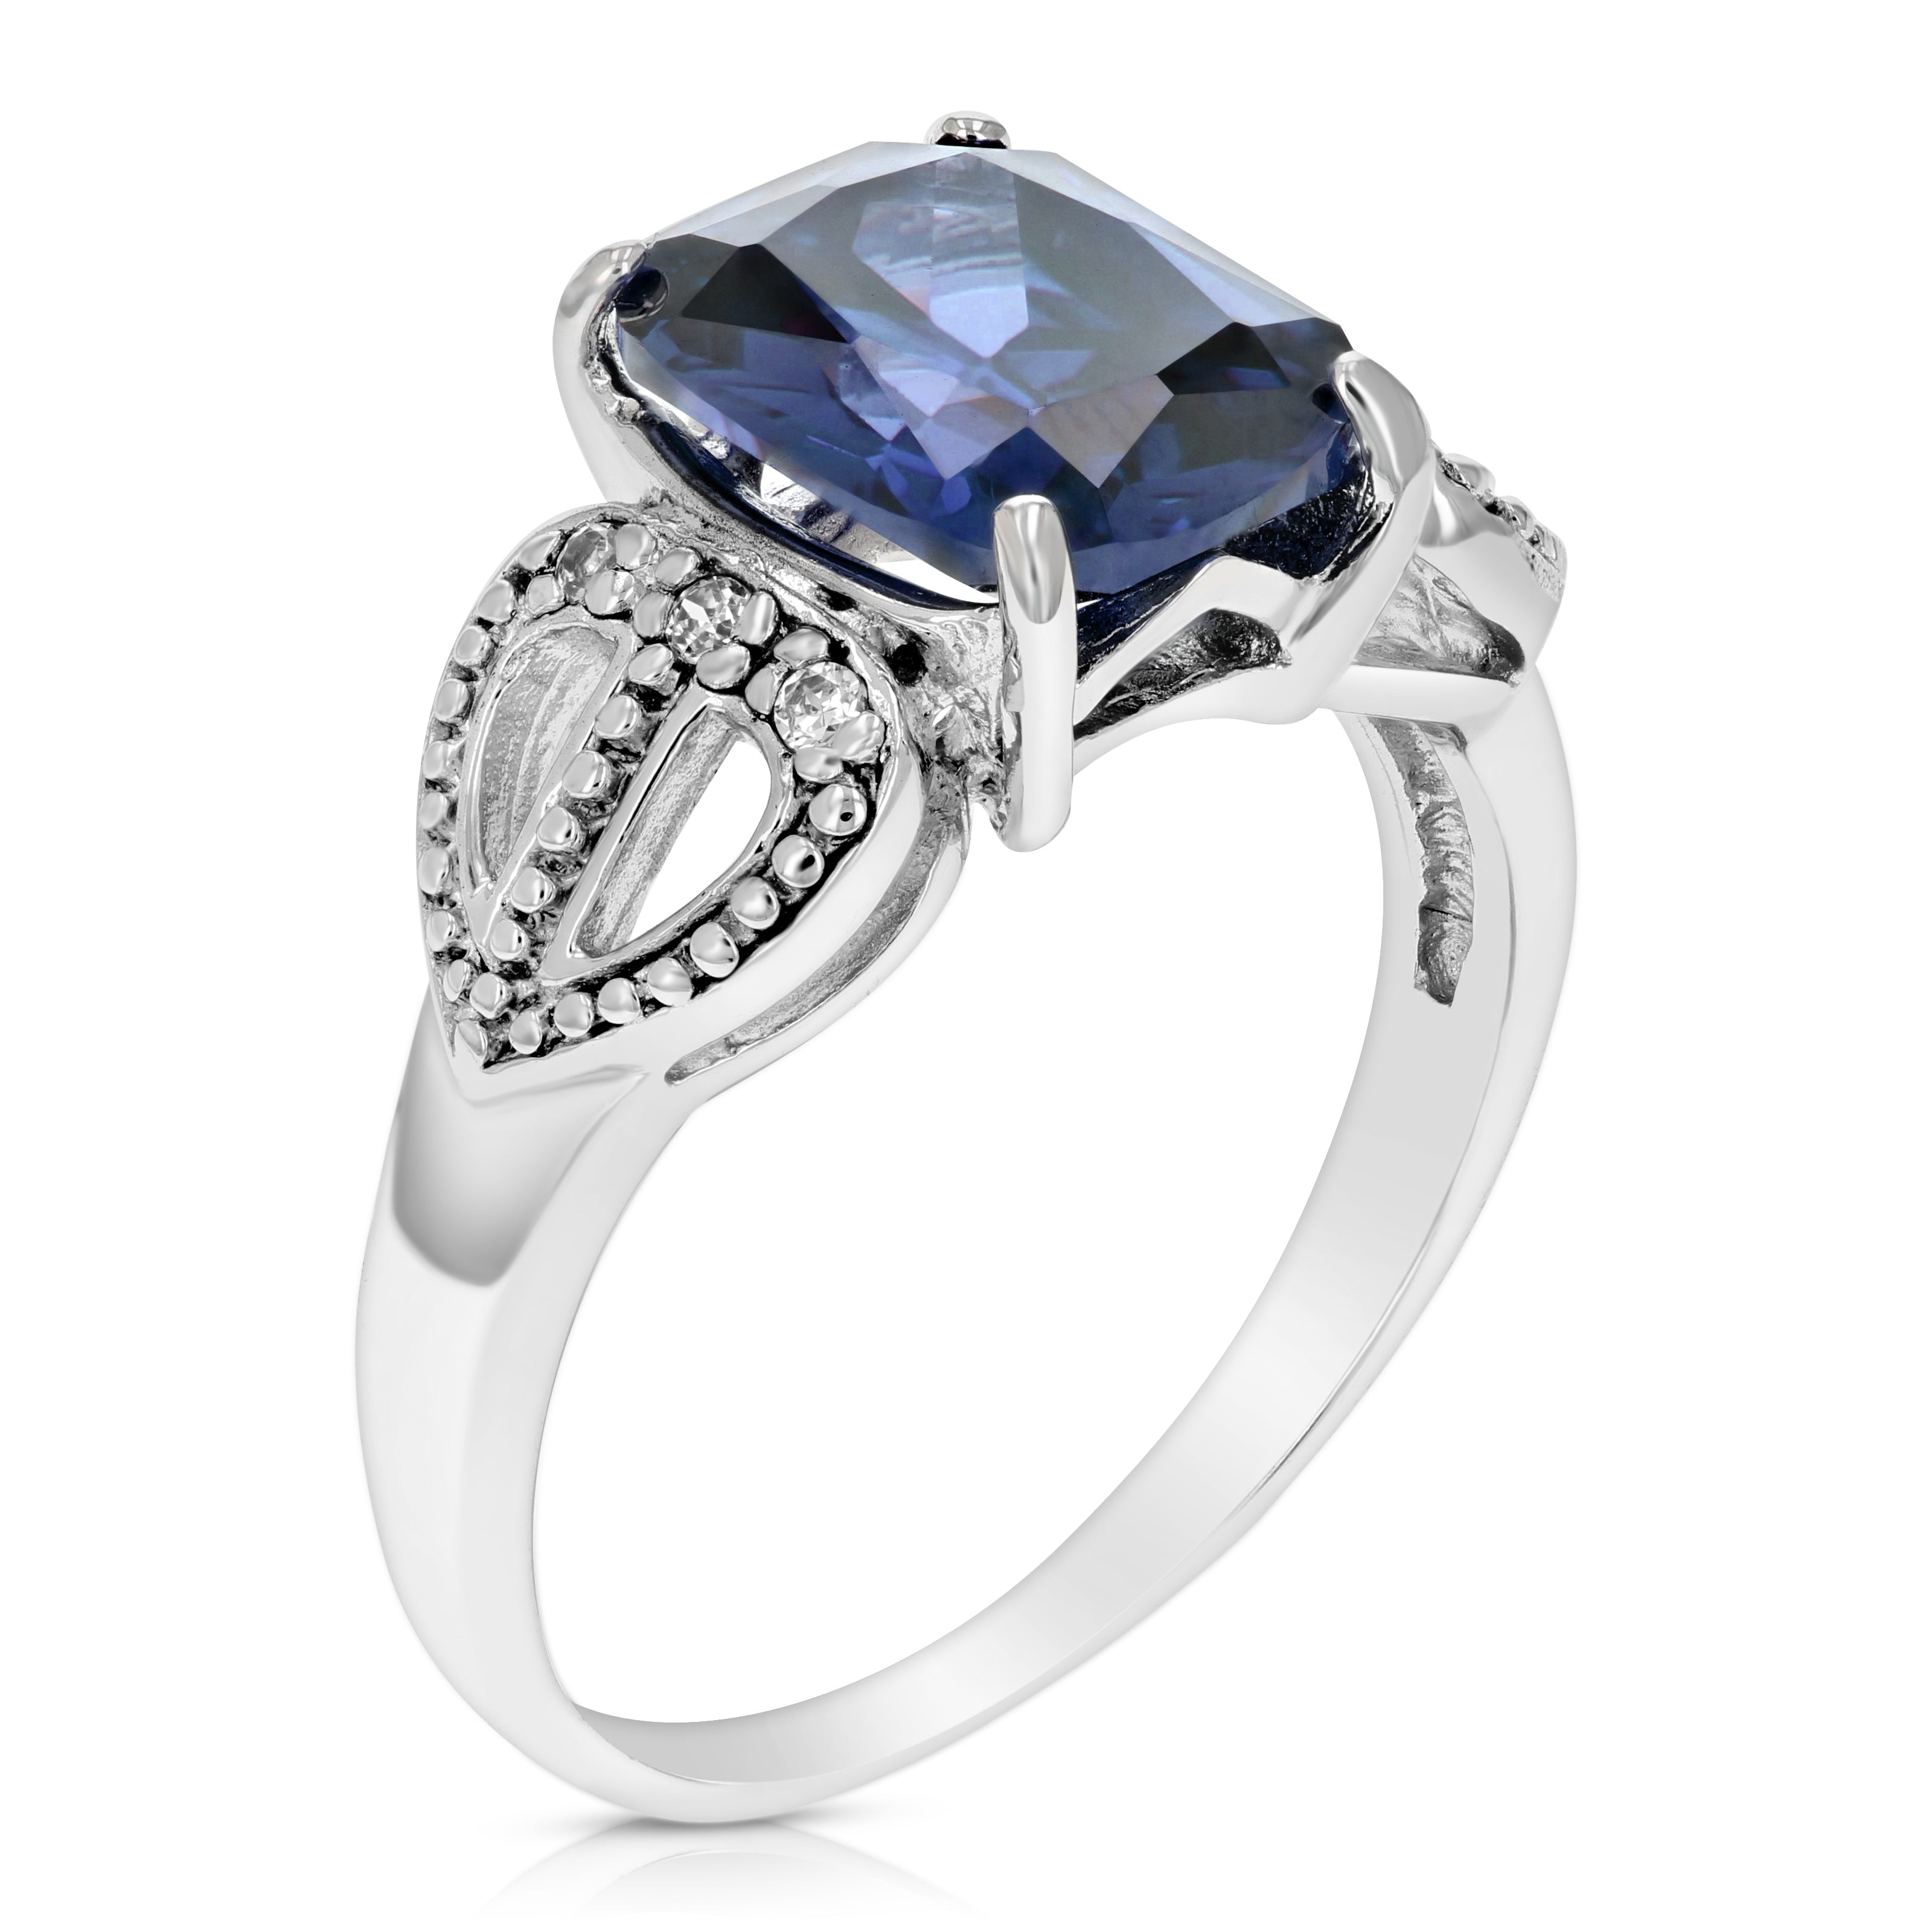 3.20 cttw Created Blue Sapphire Ring .925 Sterling Silver Emerald Cut 10x8 MM Size 7